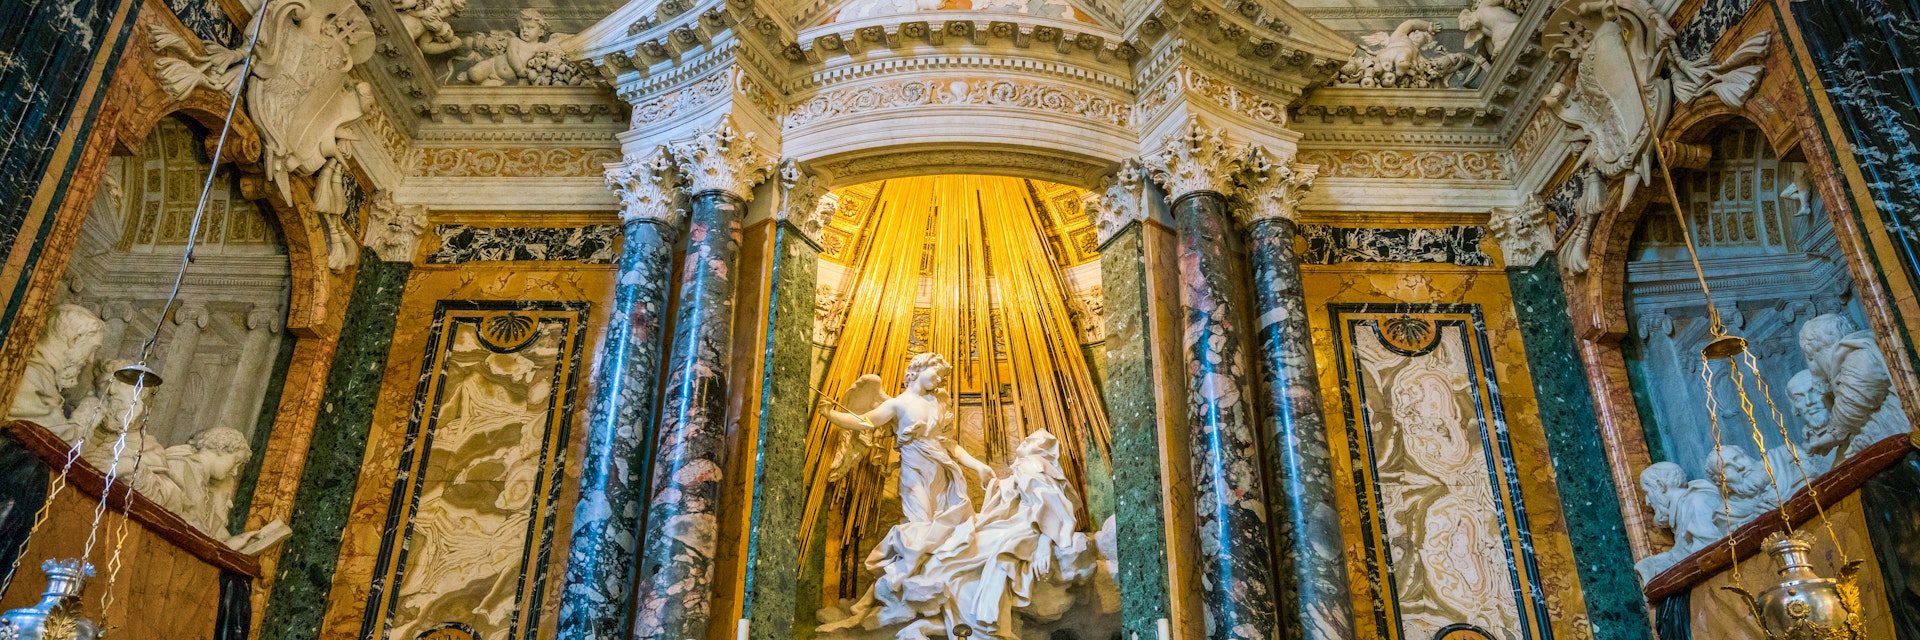 The Ecstasy of Saint Teresa in the Church of Santa Maria della Vittoria in Rome, Italy. December-12-2017; Shutterstock ID 776398957; your: Claire Naylor; gl: 65050; netsuite: Online editorial; full: Rome POIs
776398957